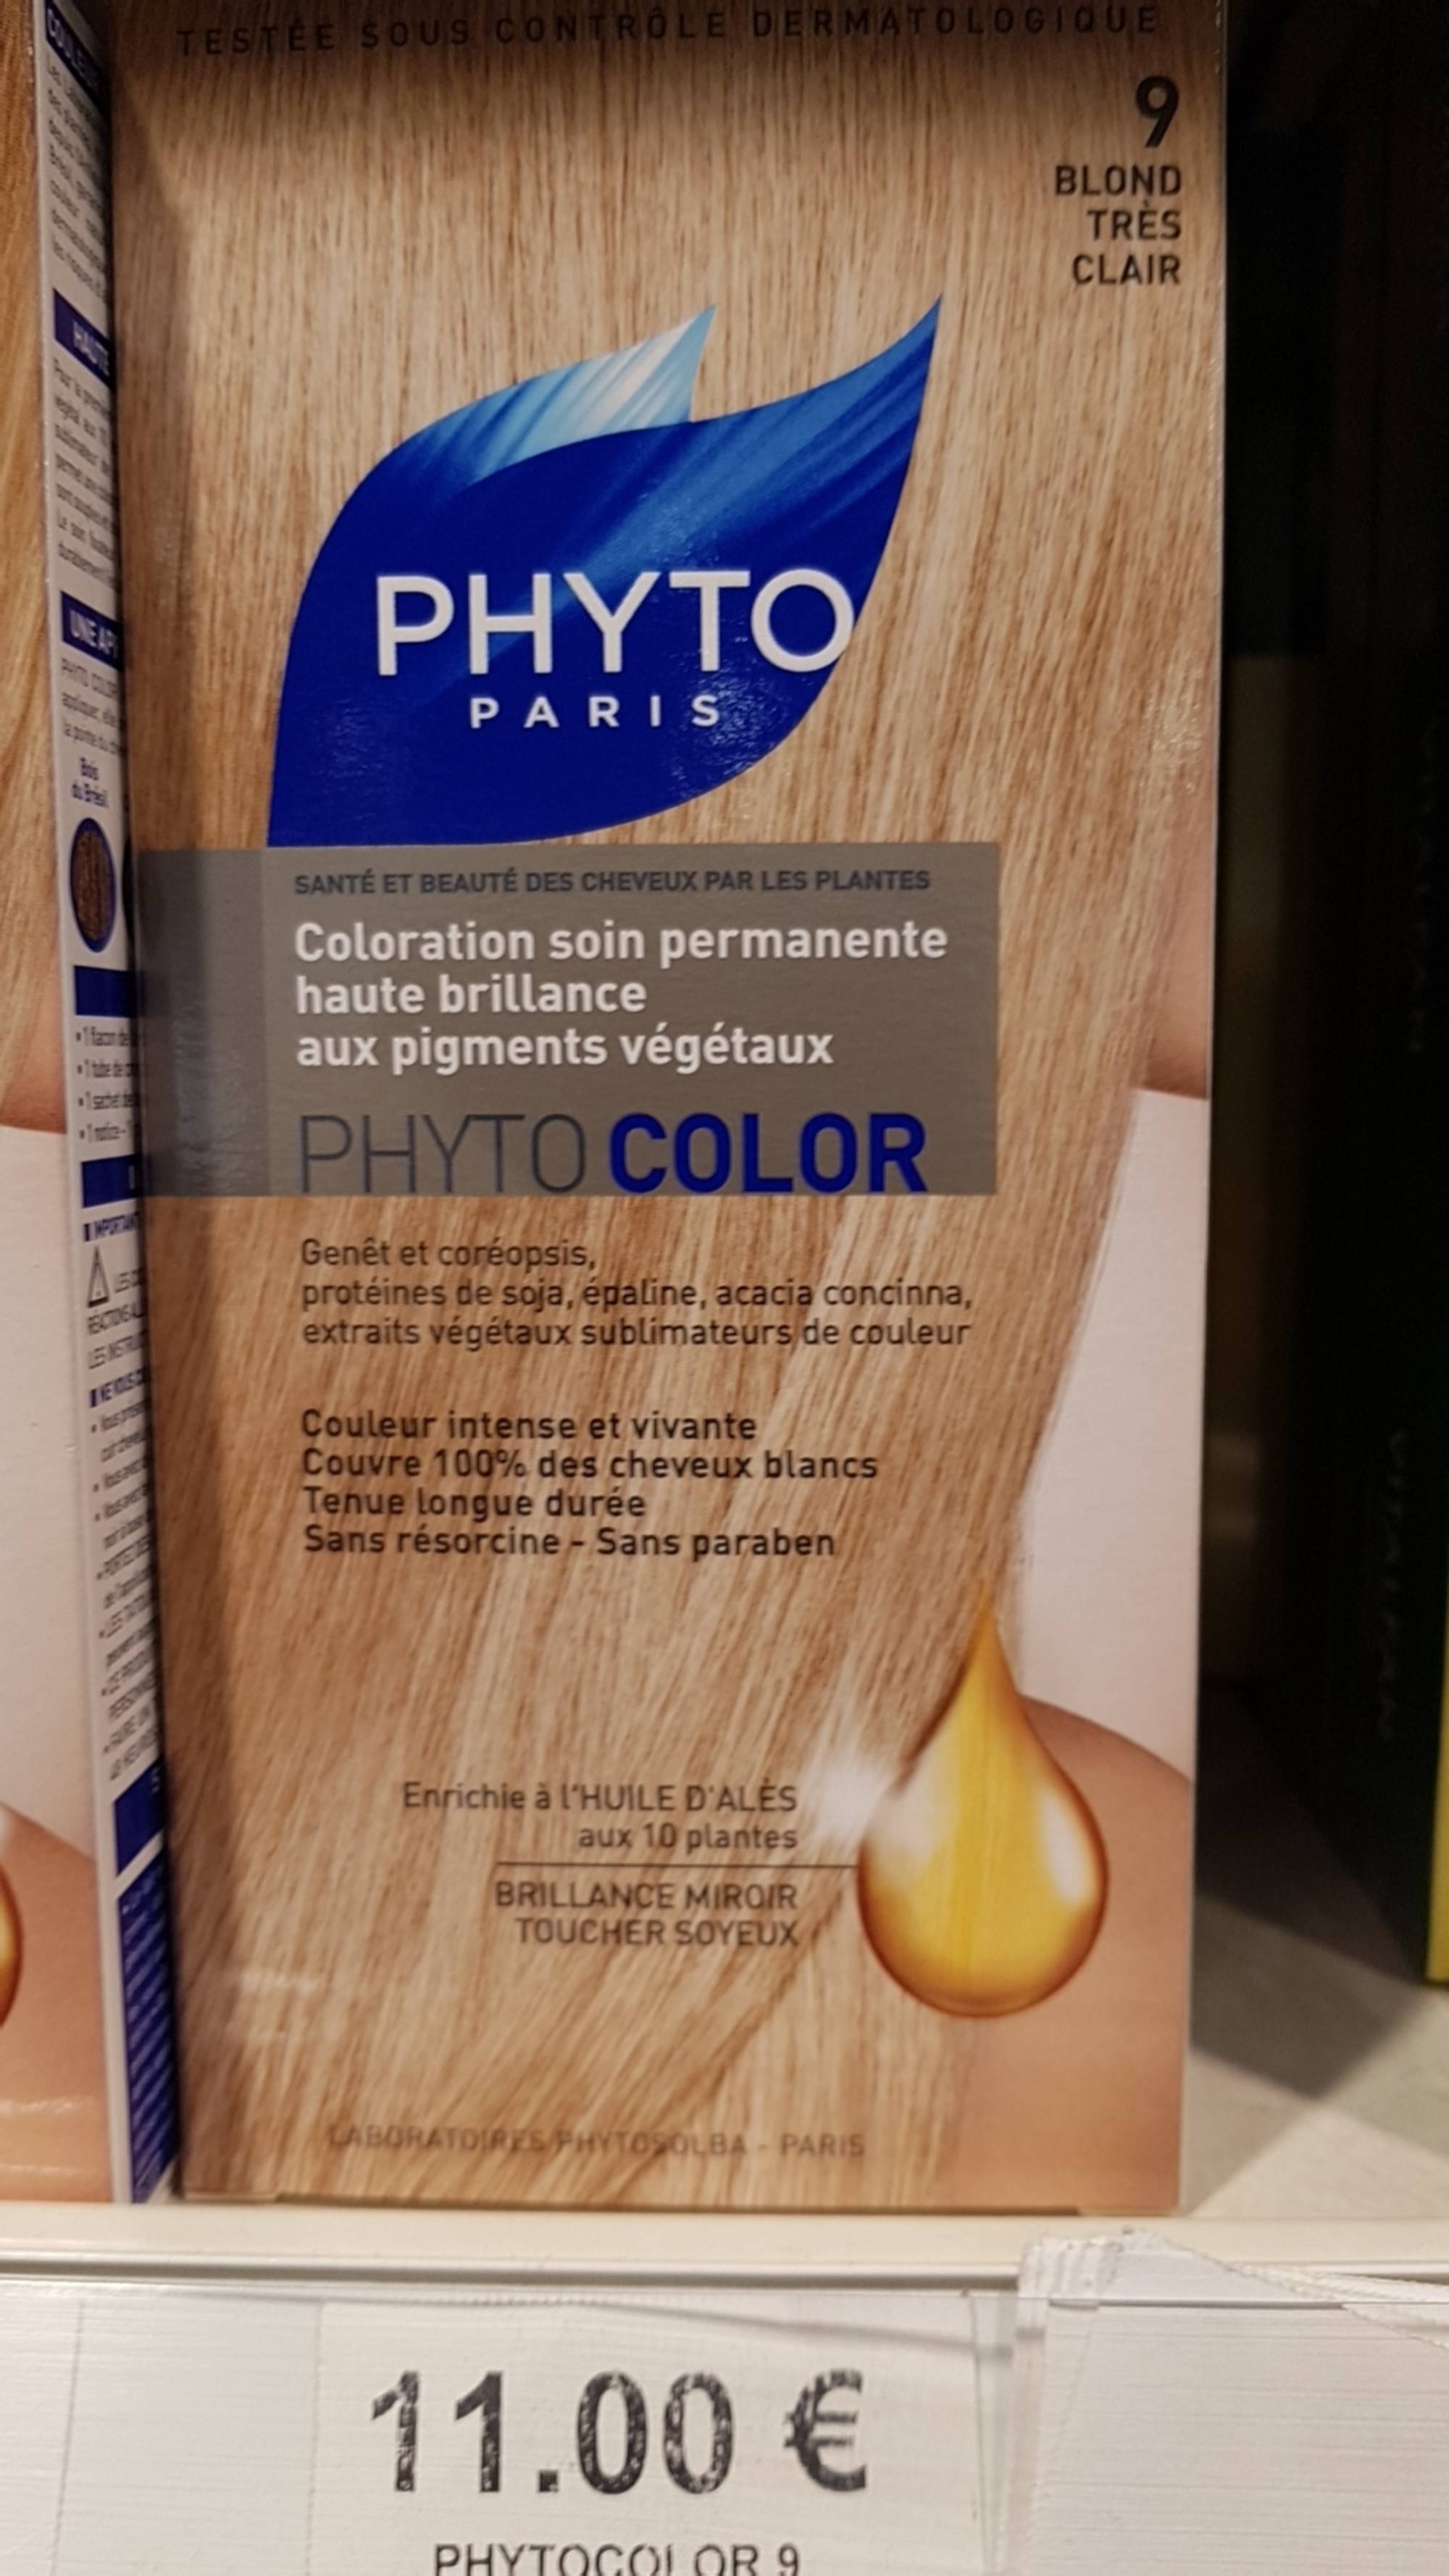 PHYTO - Phyto color - Coloration soin permanente blond très clair 9